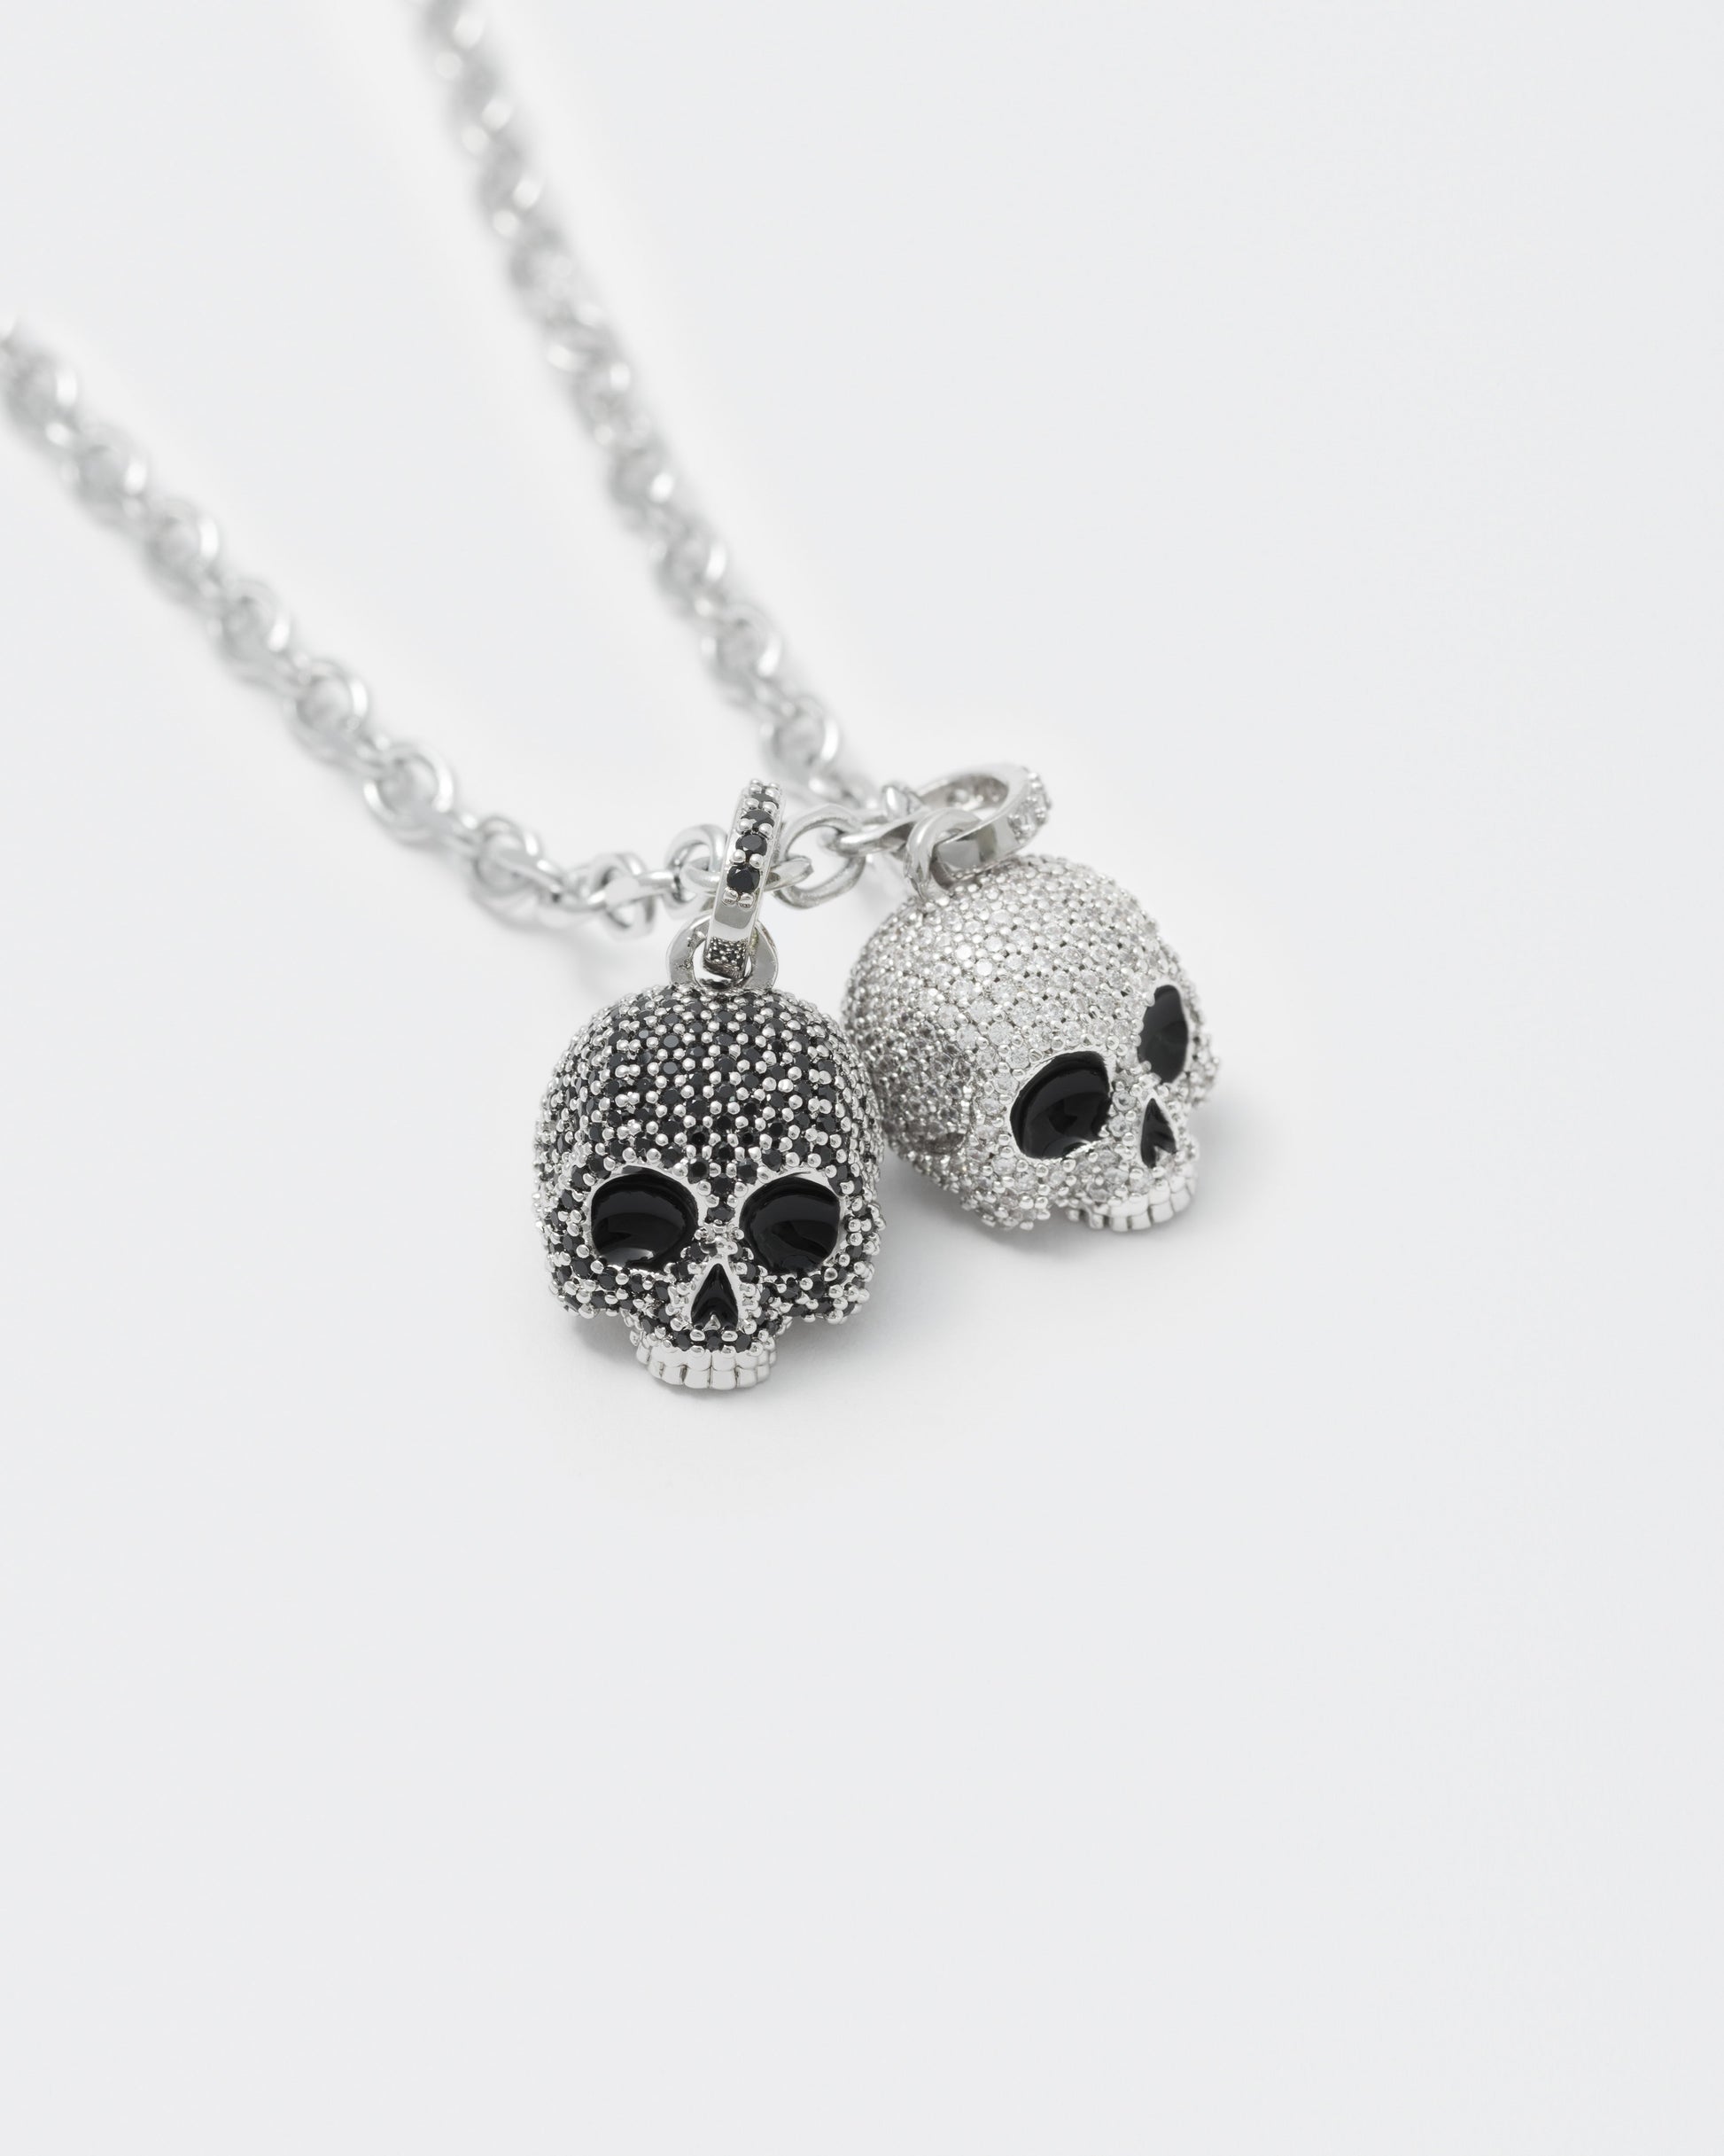 detail of 8k white gold coated skulls pendant necklace with contrasting hand-set micropavè stones in white and black and hand painted black enamel